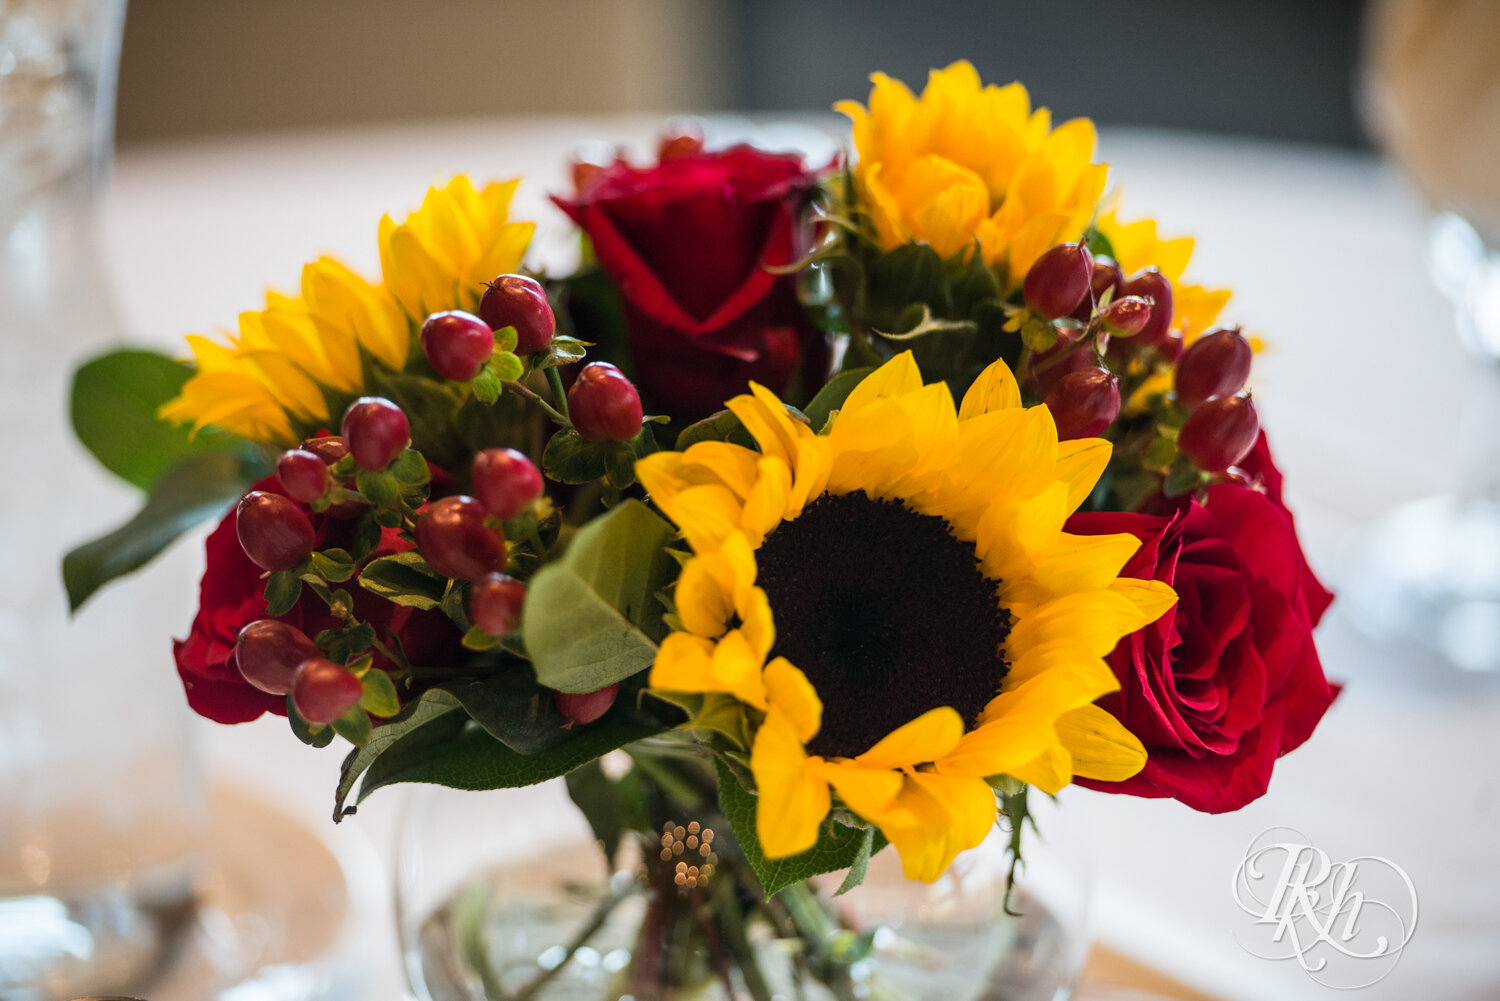 Indoor wedding reception setup with sunflowers at Minnesota Horse and Hunt Club in Prior Lake, Minnesota.